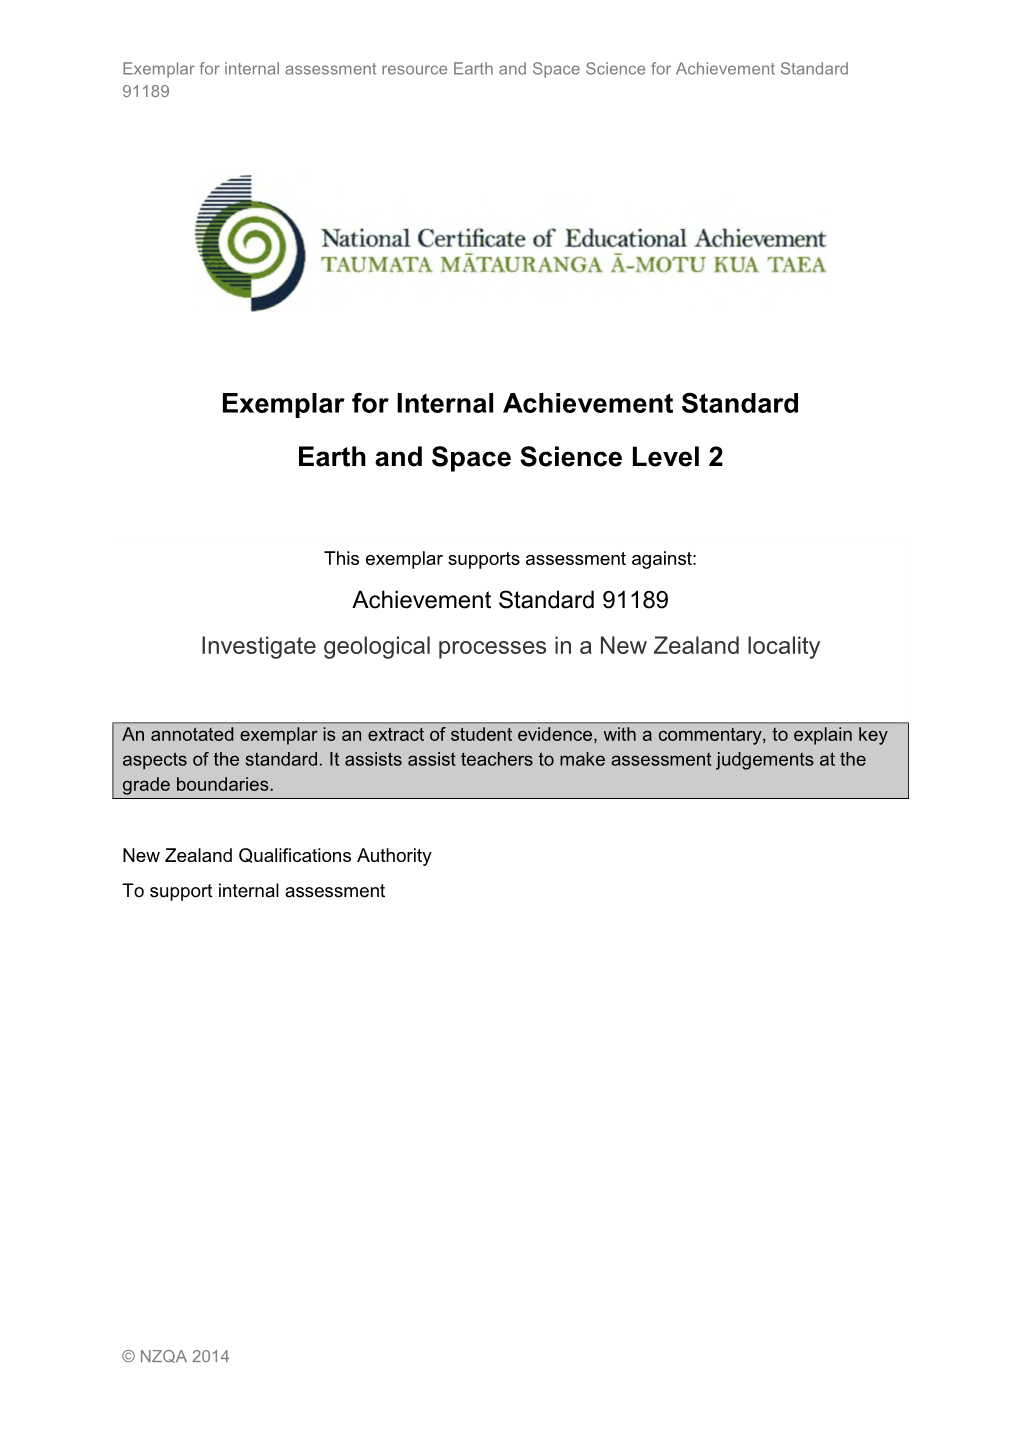 Exemplar for Internal Achievement Standard Earth and Space Science Level 2